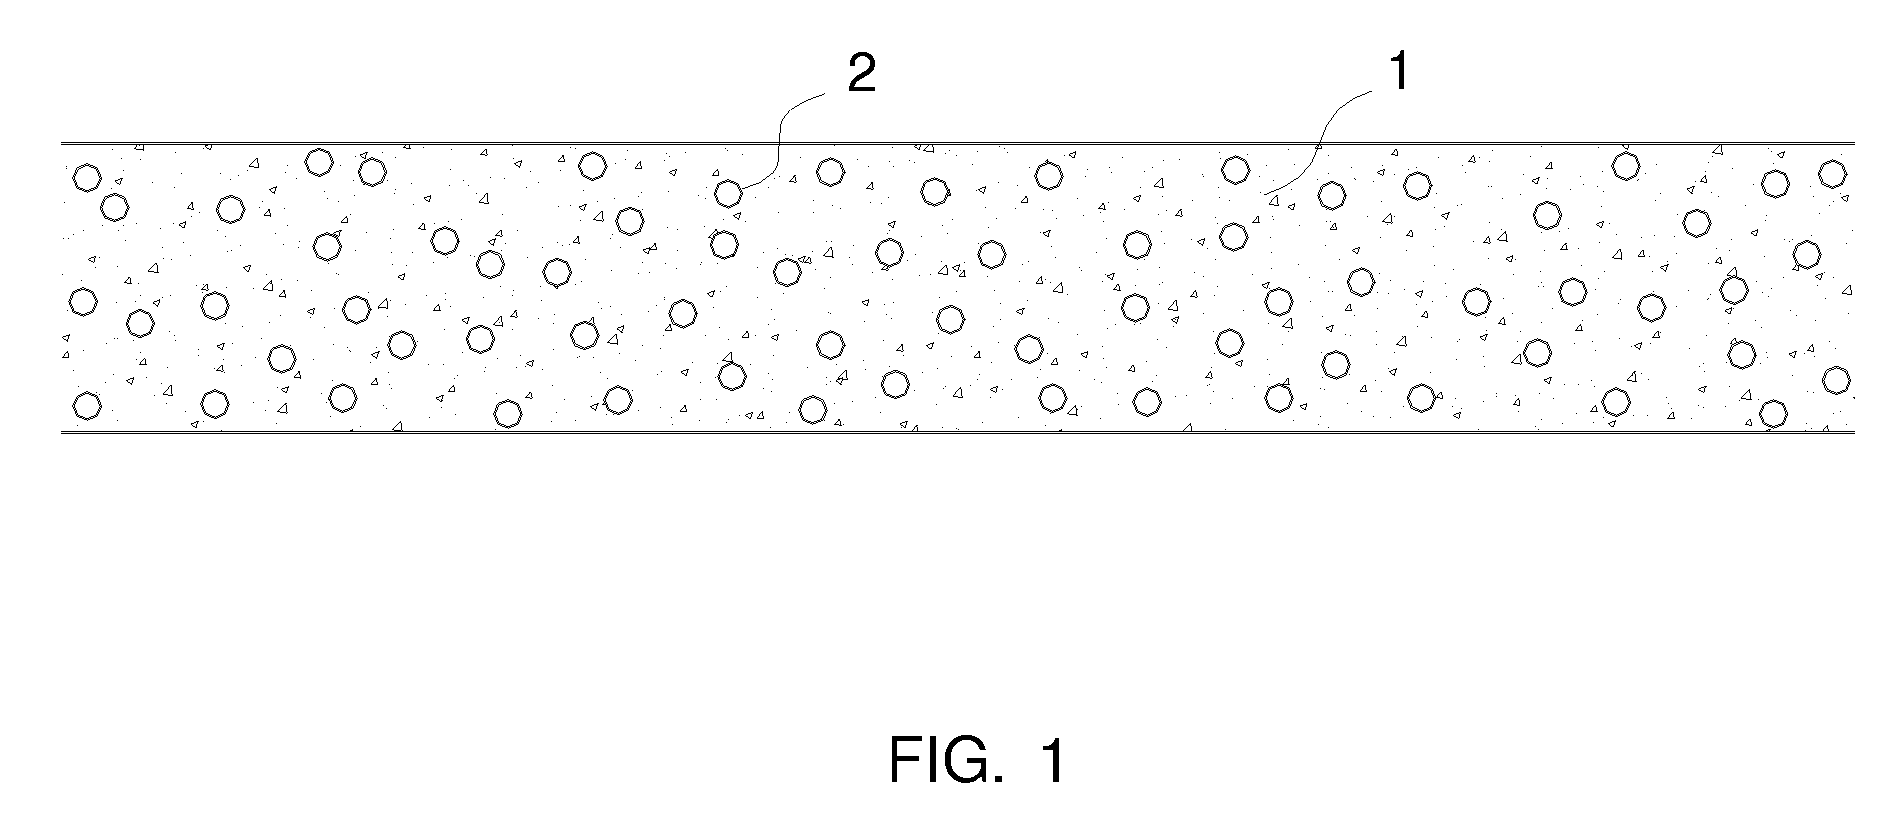 Method to Regulate temperature and Reduce Heat Island Effect